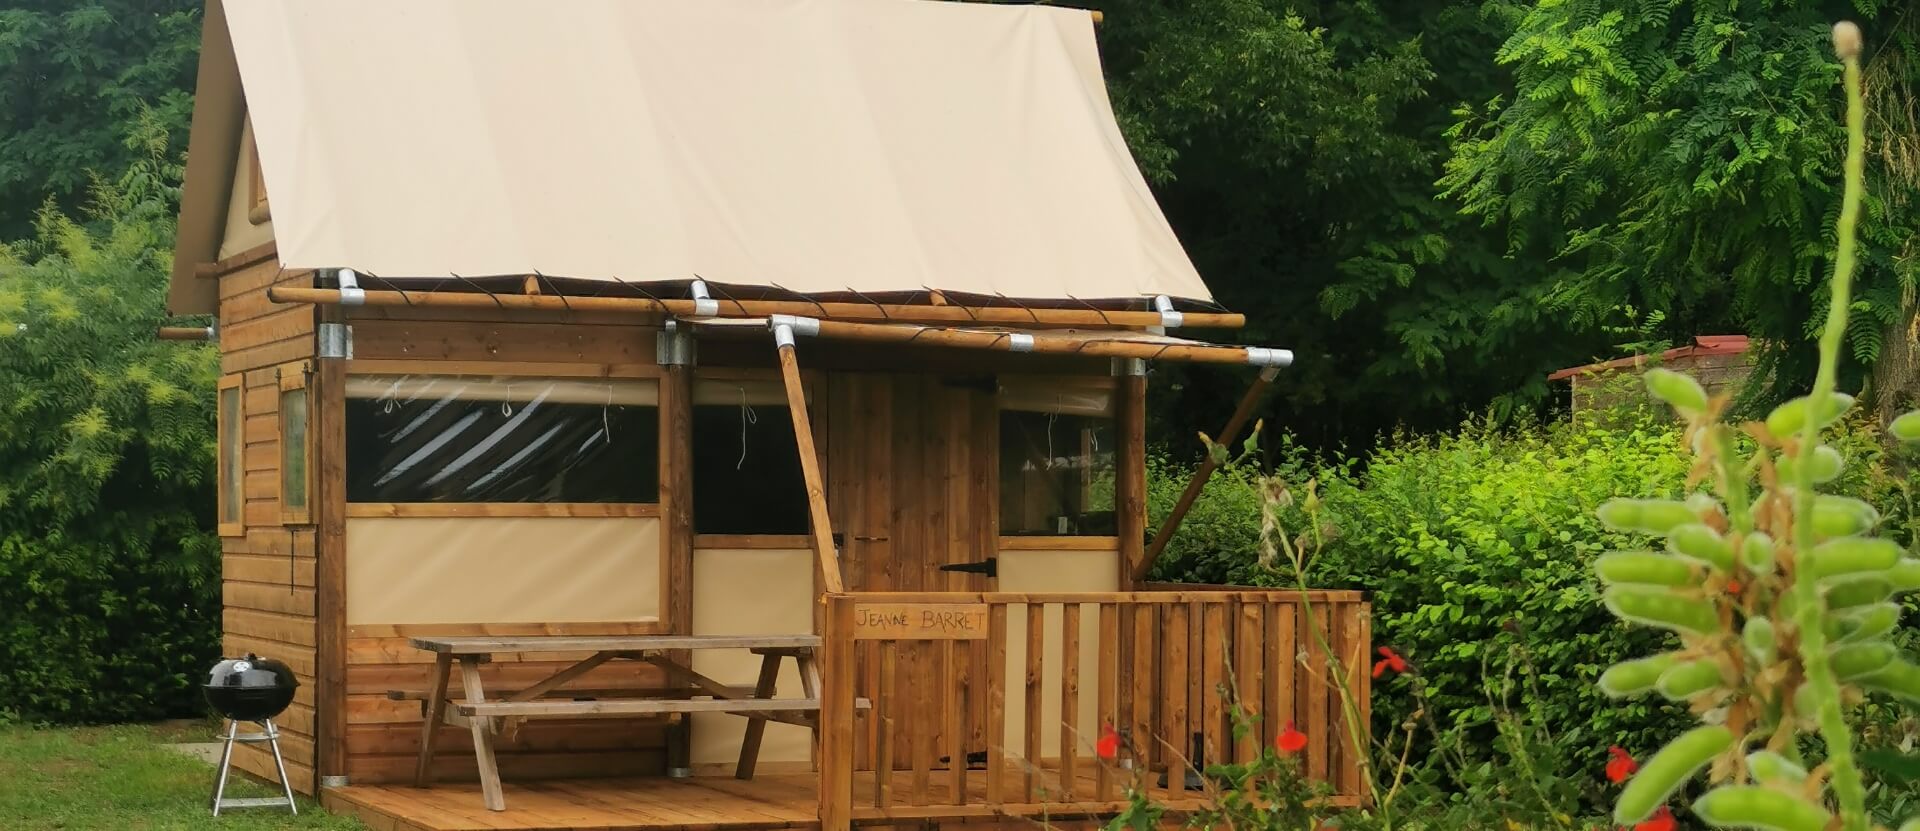 Outside view of the lodge tent for rent in the Ain department